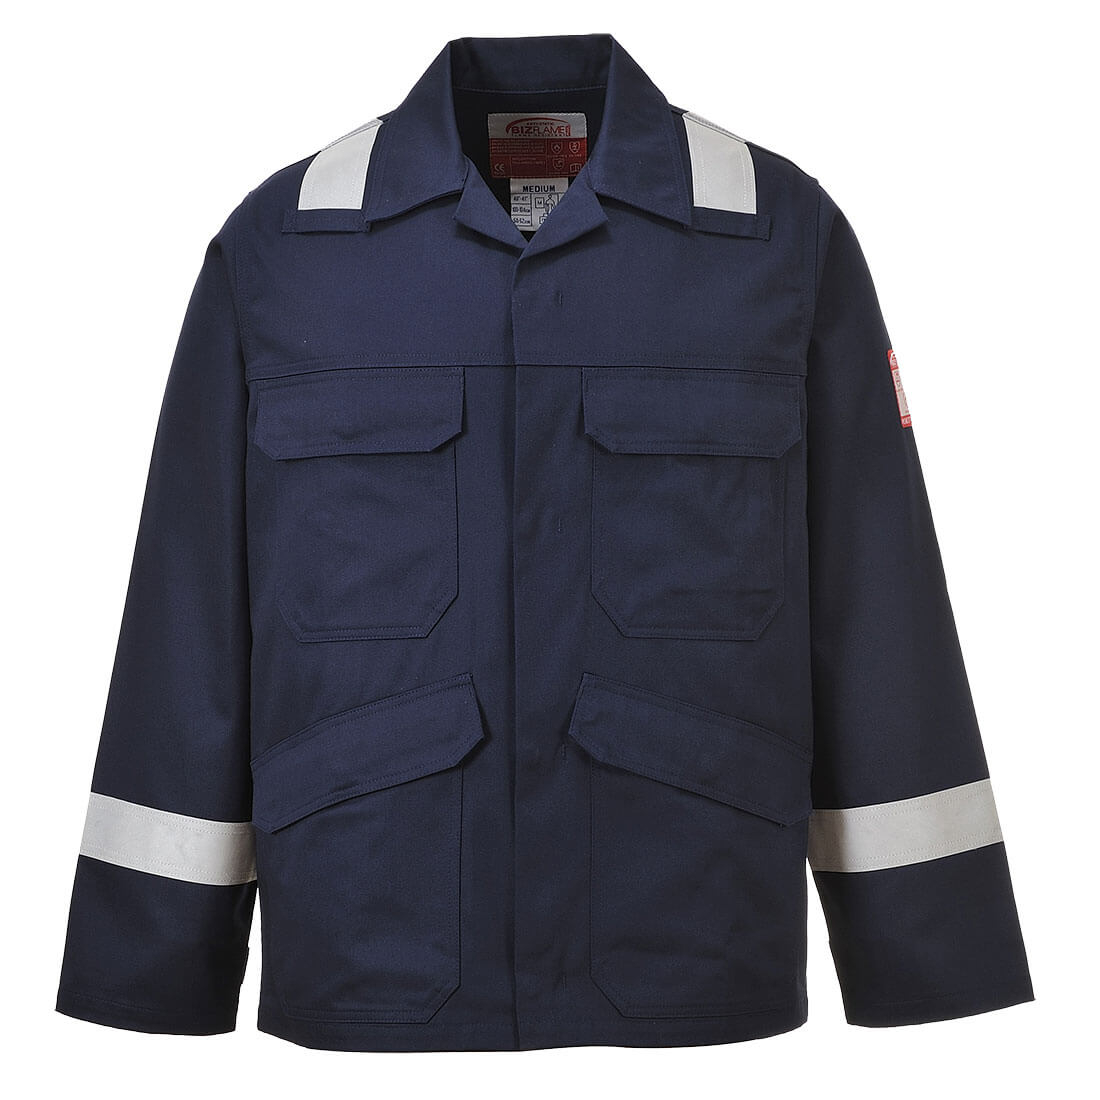  Flame Resistant Outdoor Durable Classic Jacket with Against Welding Hazards 